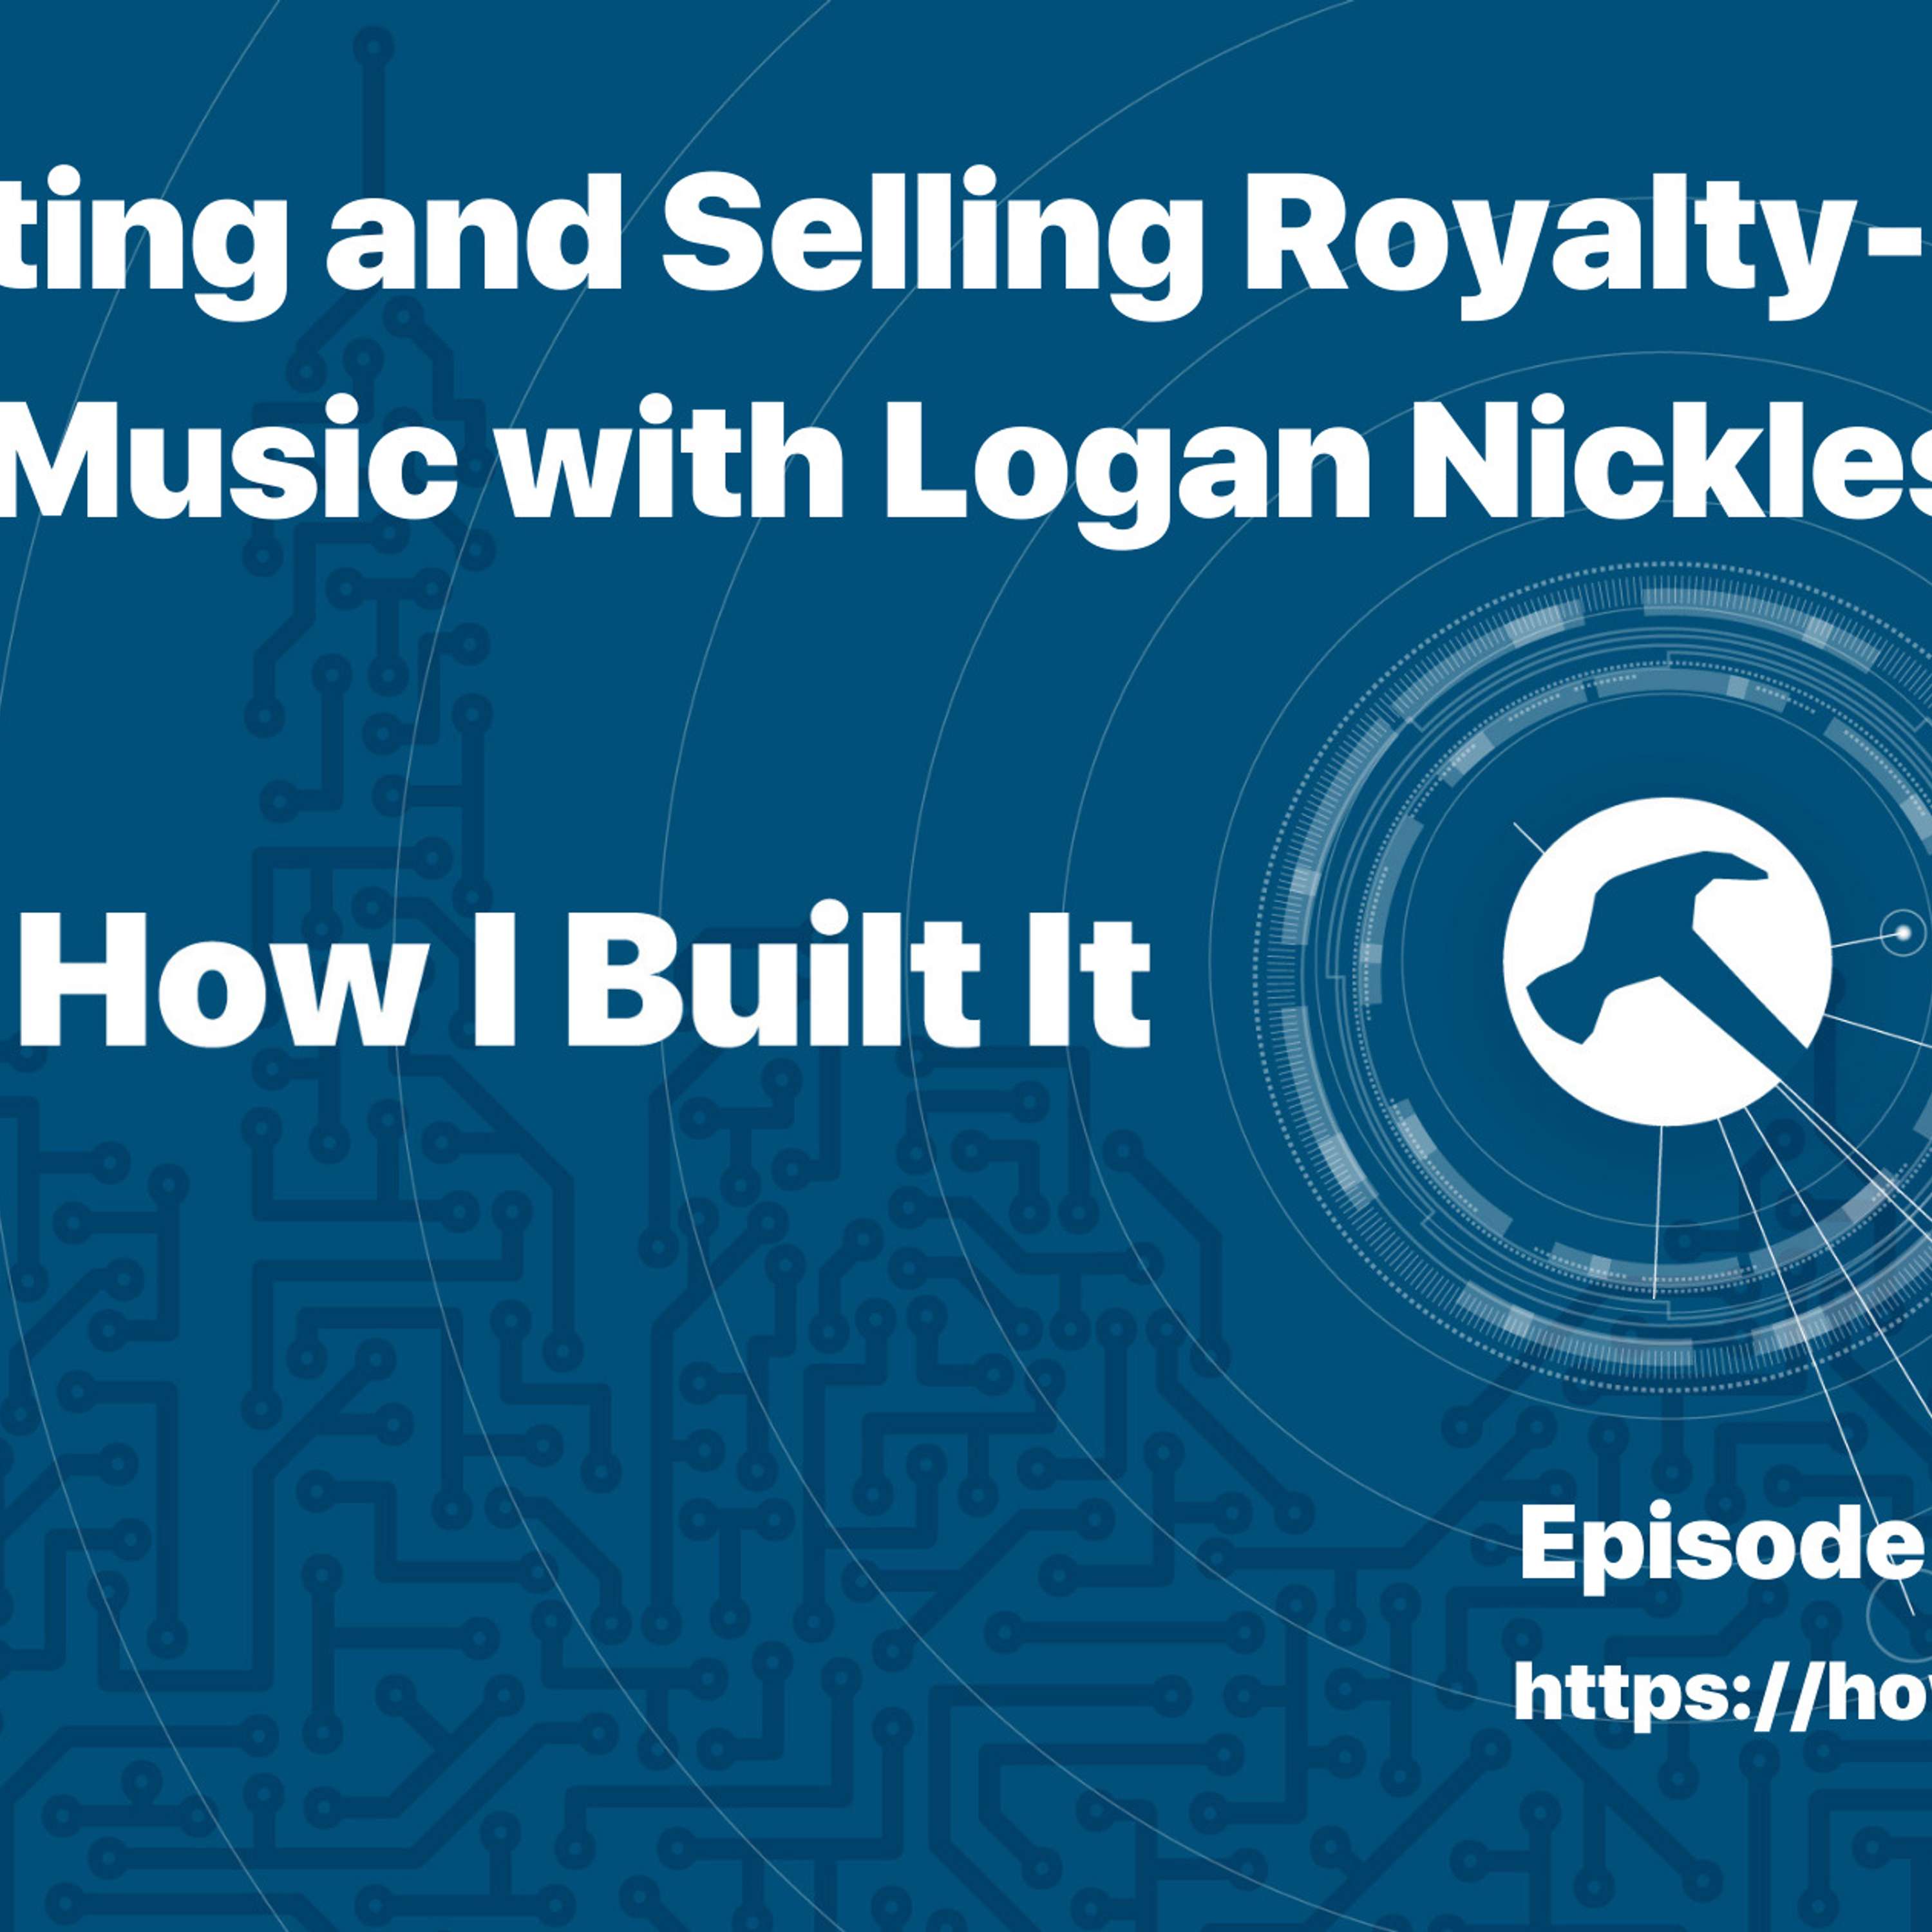 Creating and Selling Royalty-Free Music with Logan Nickleson